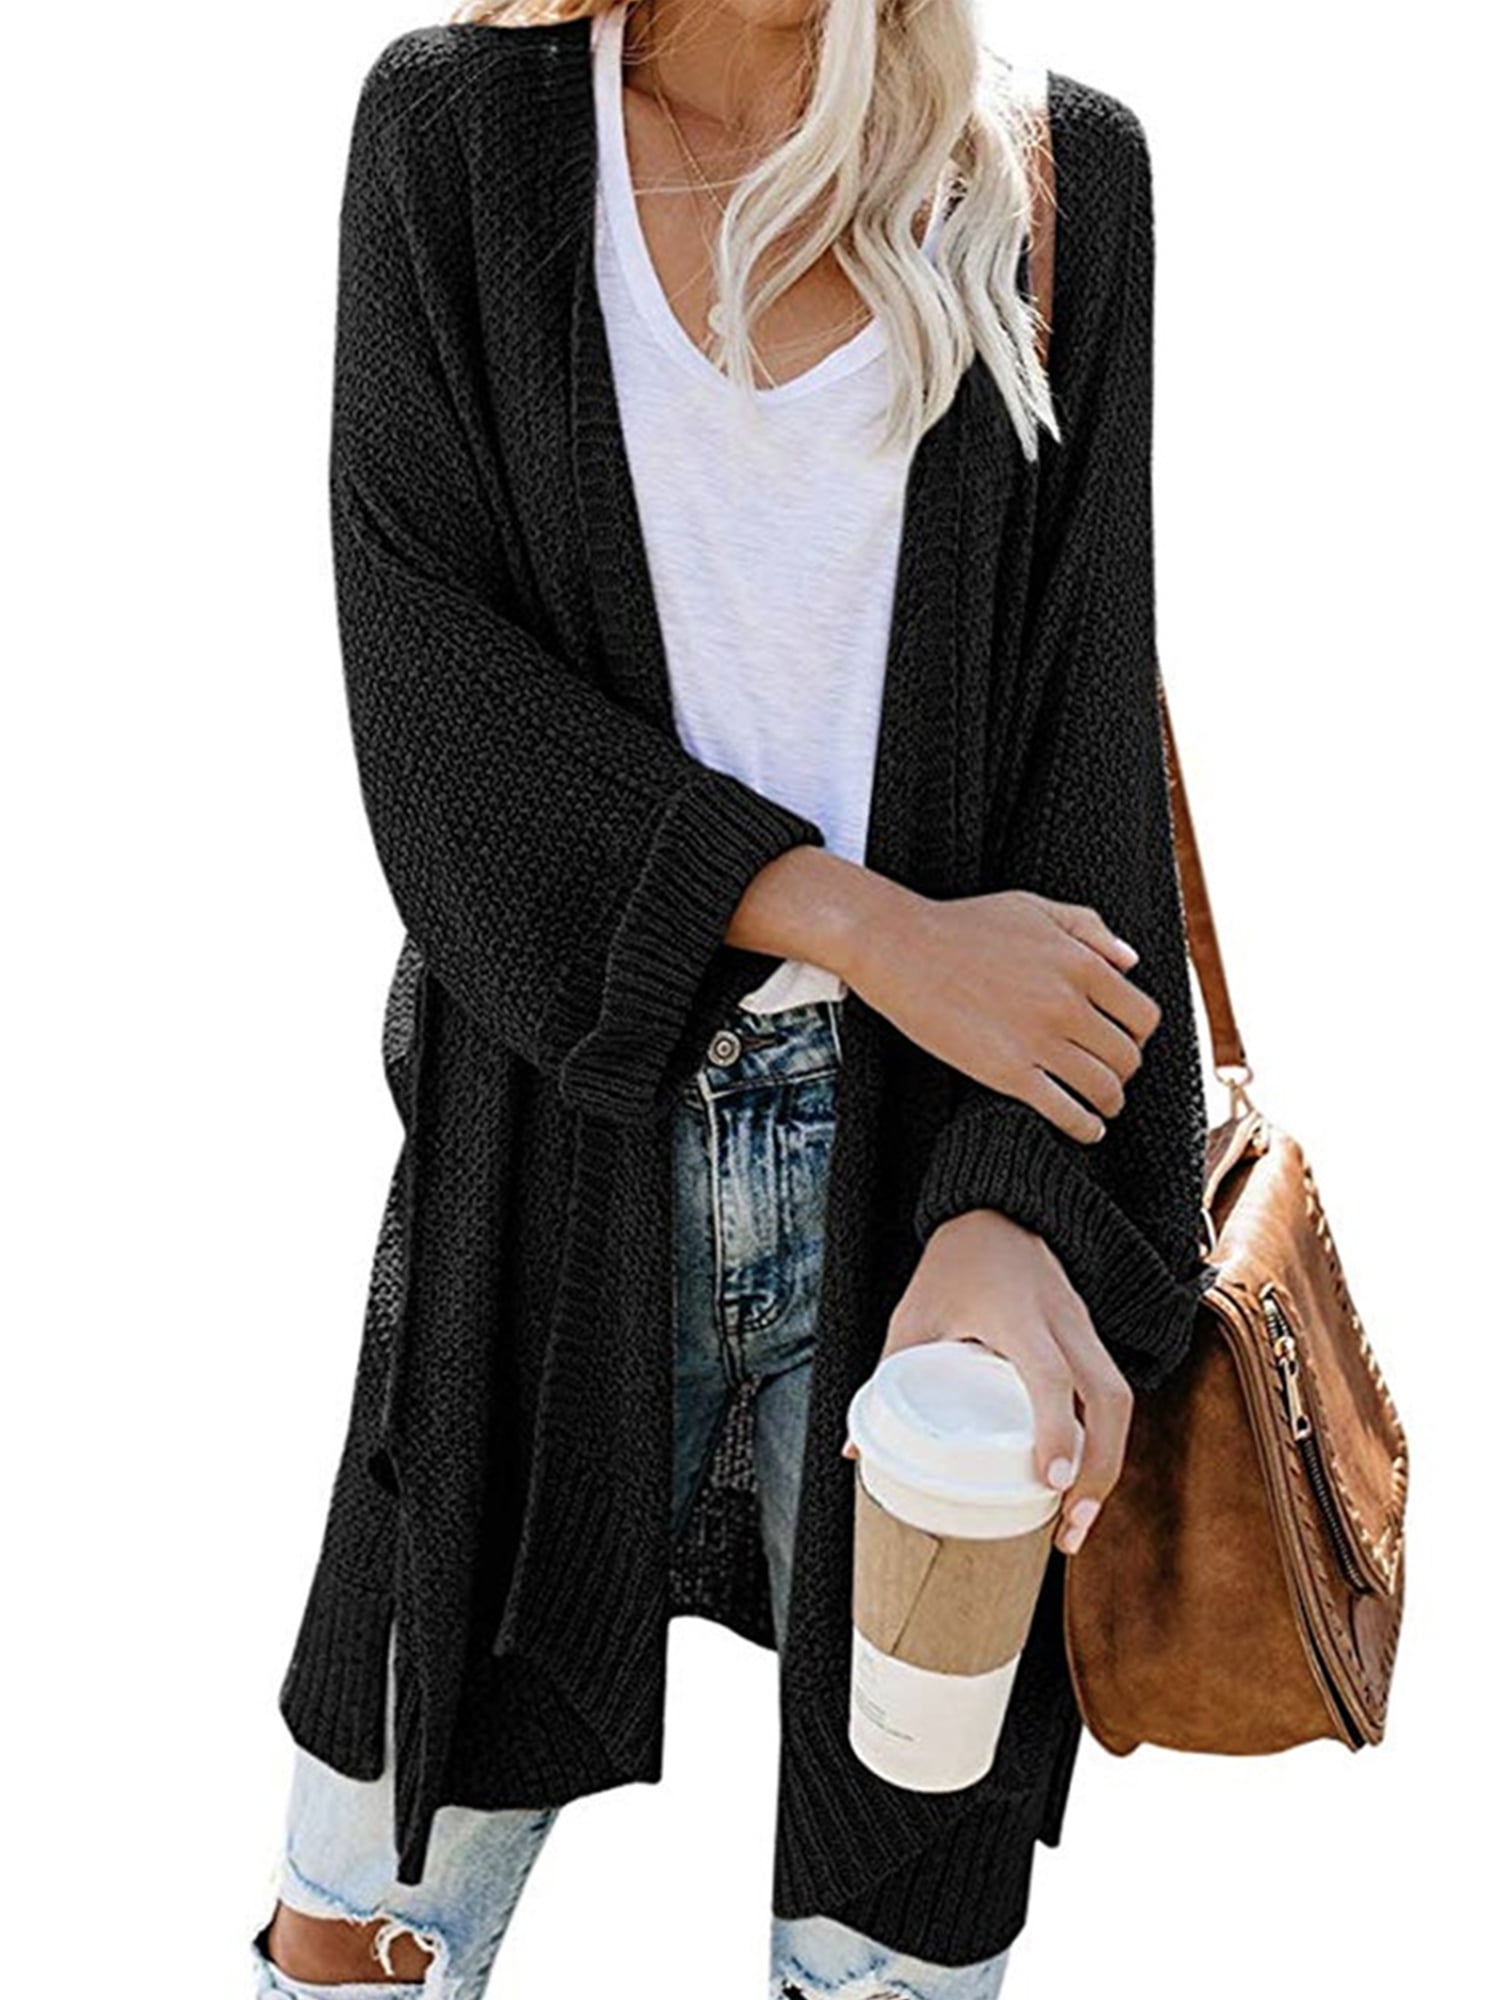 Open Front Short Sleeve Cardigans for Women,Women Winter Batwing Sleeve Solid Knitted Bandage Sweater Coat Tops Blouse